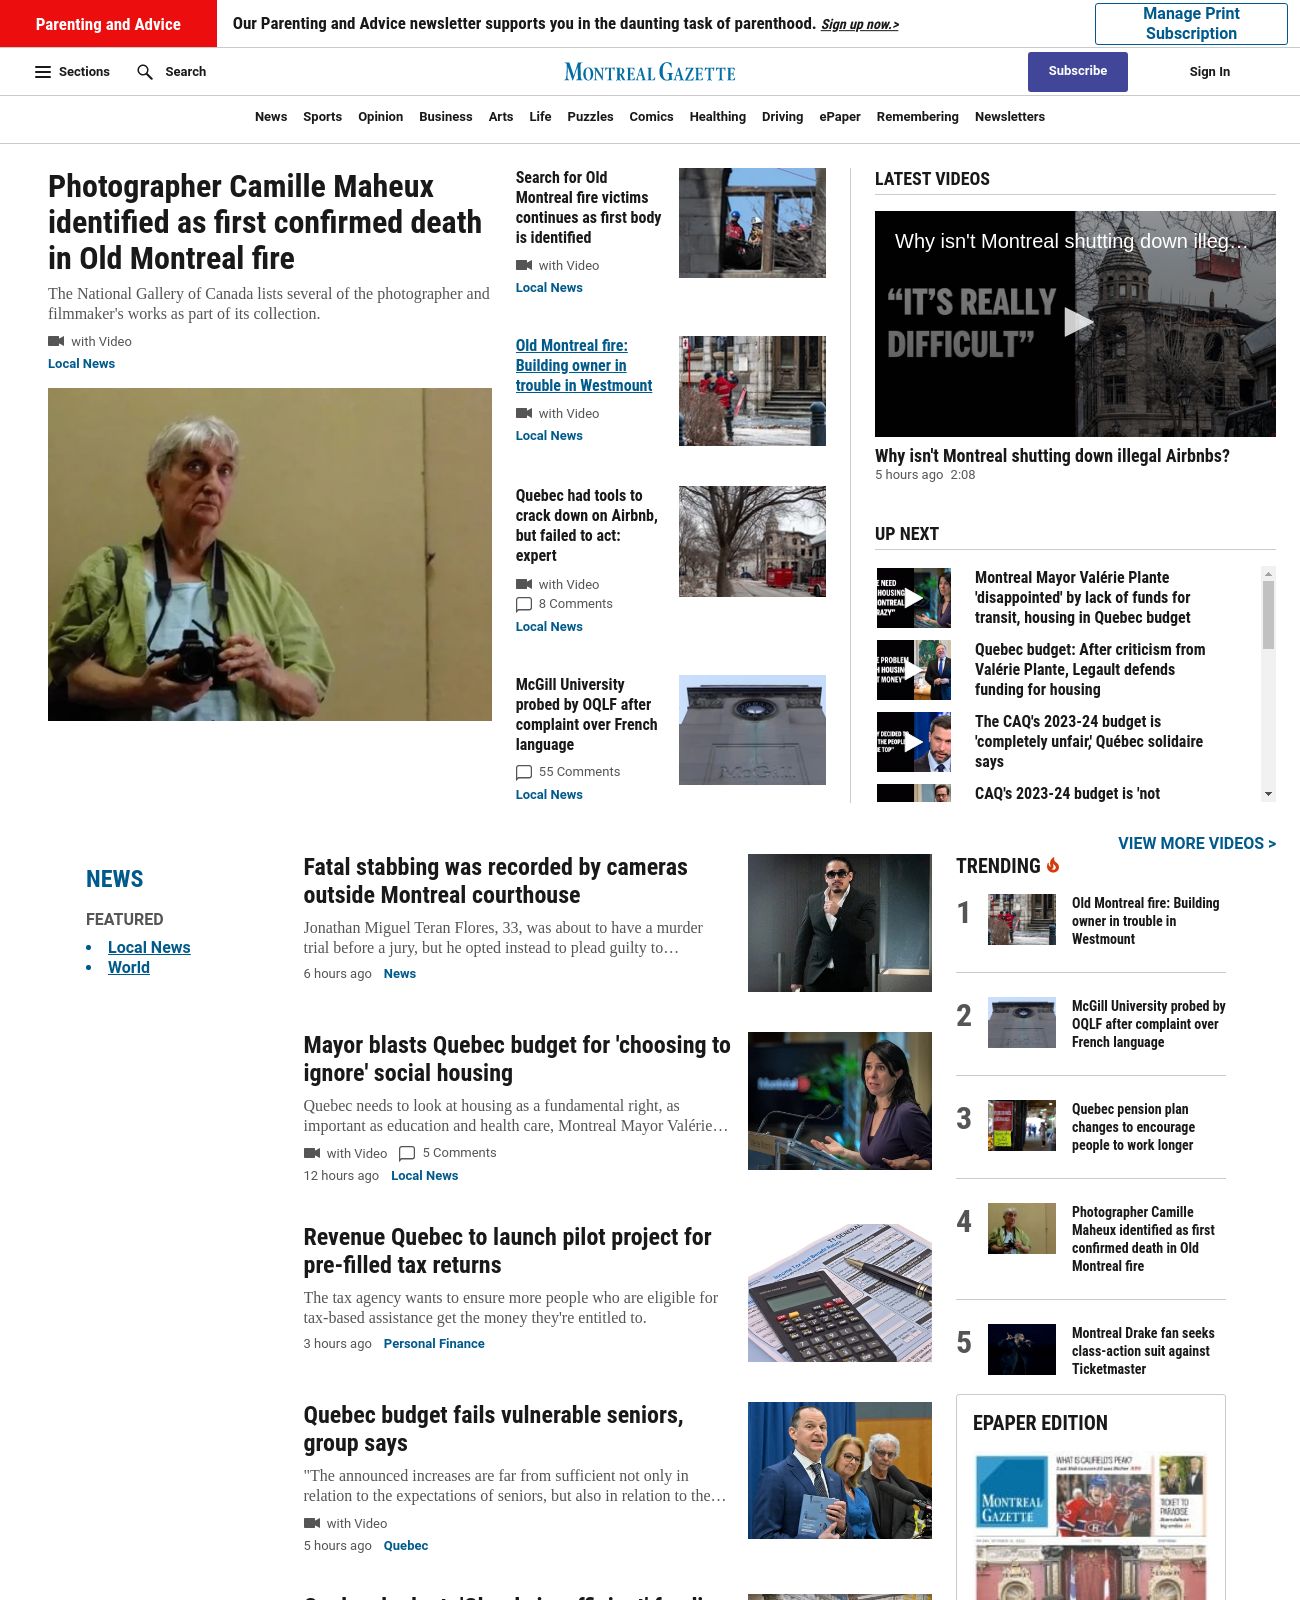 Montreal Gazette at 2023-03-22 22:24:16-04:00 local time